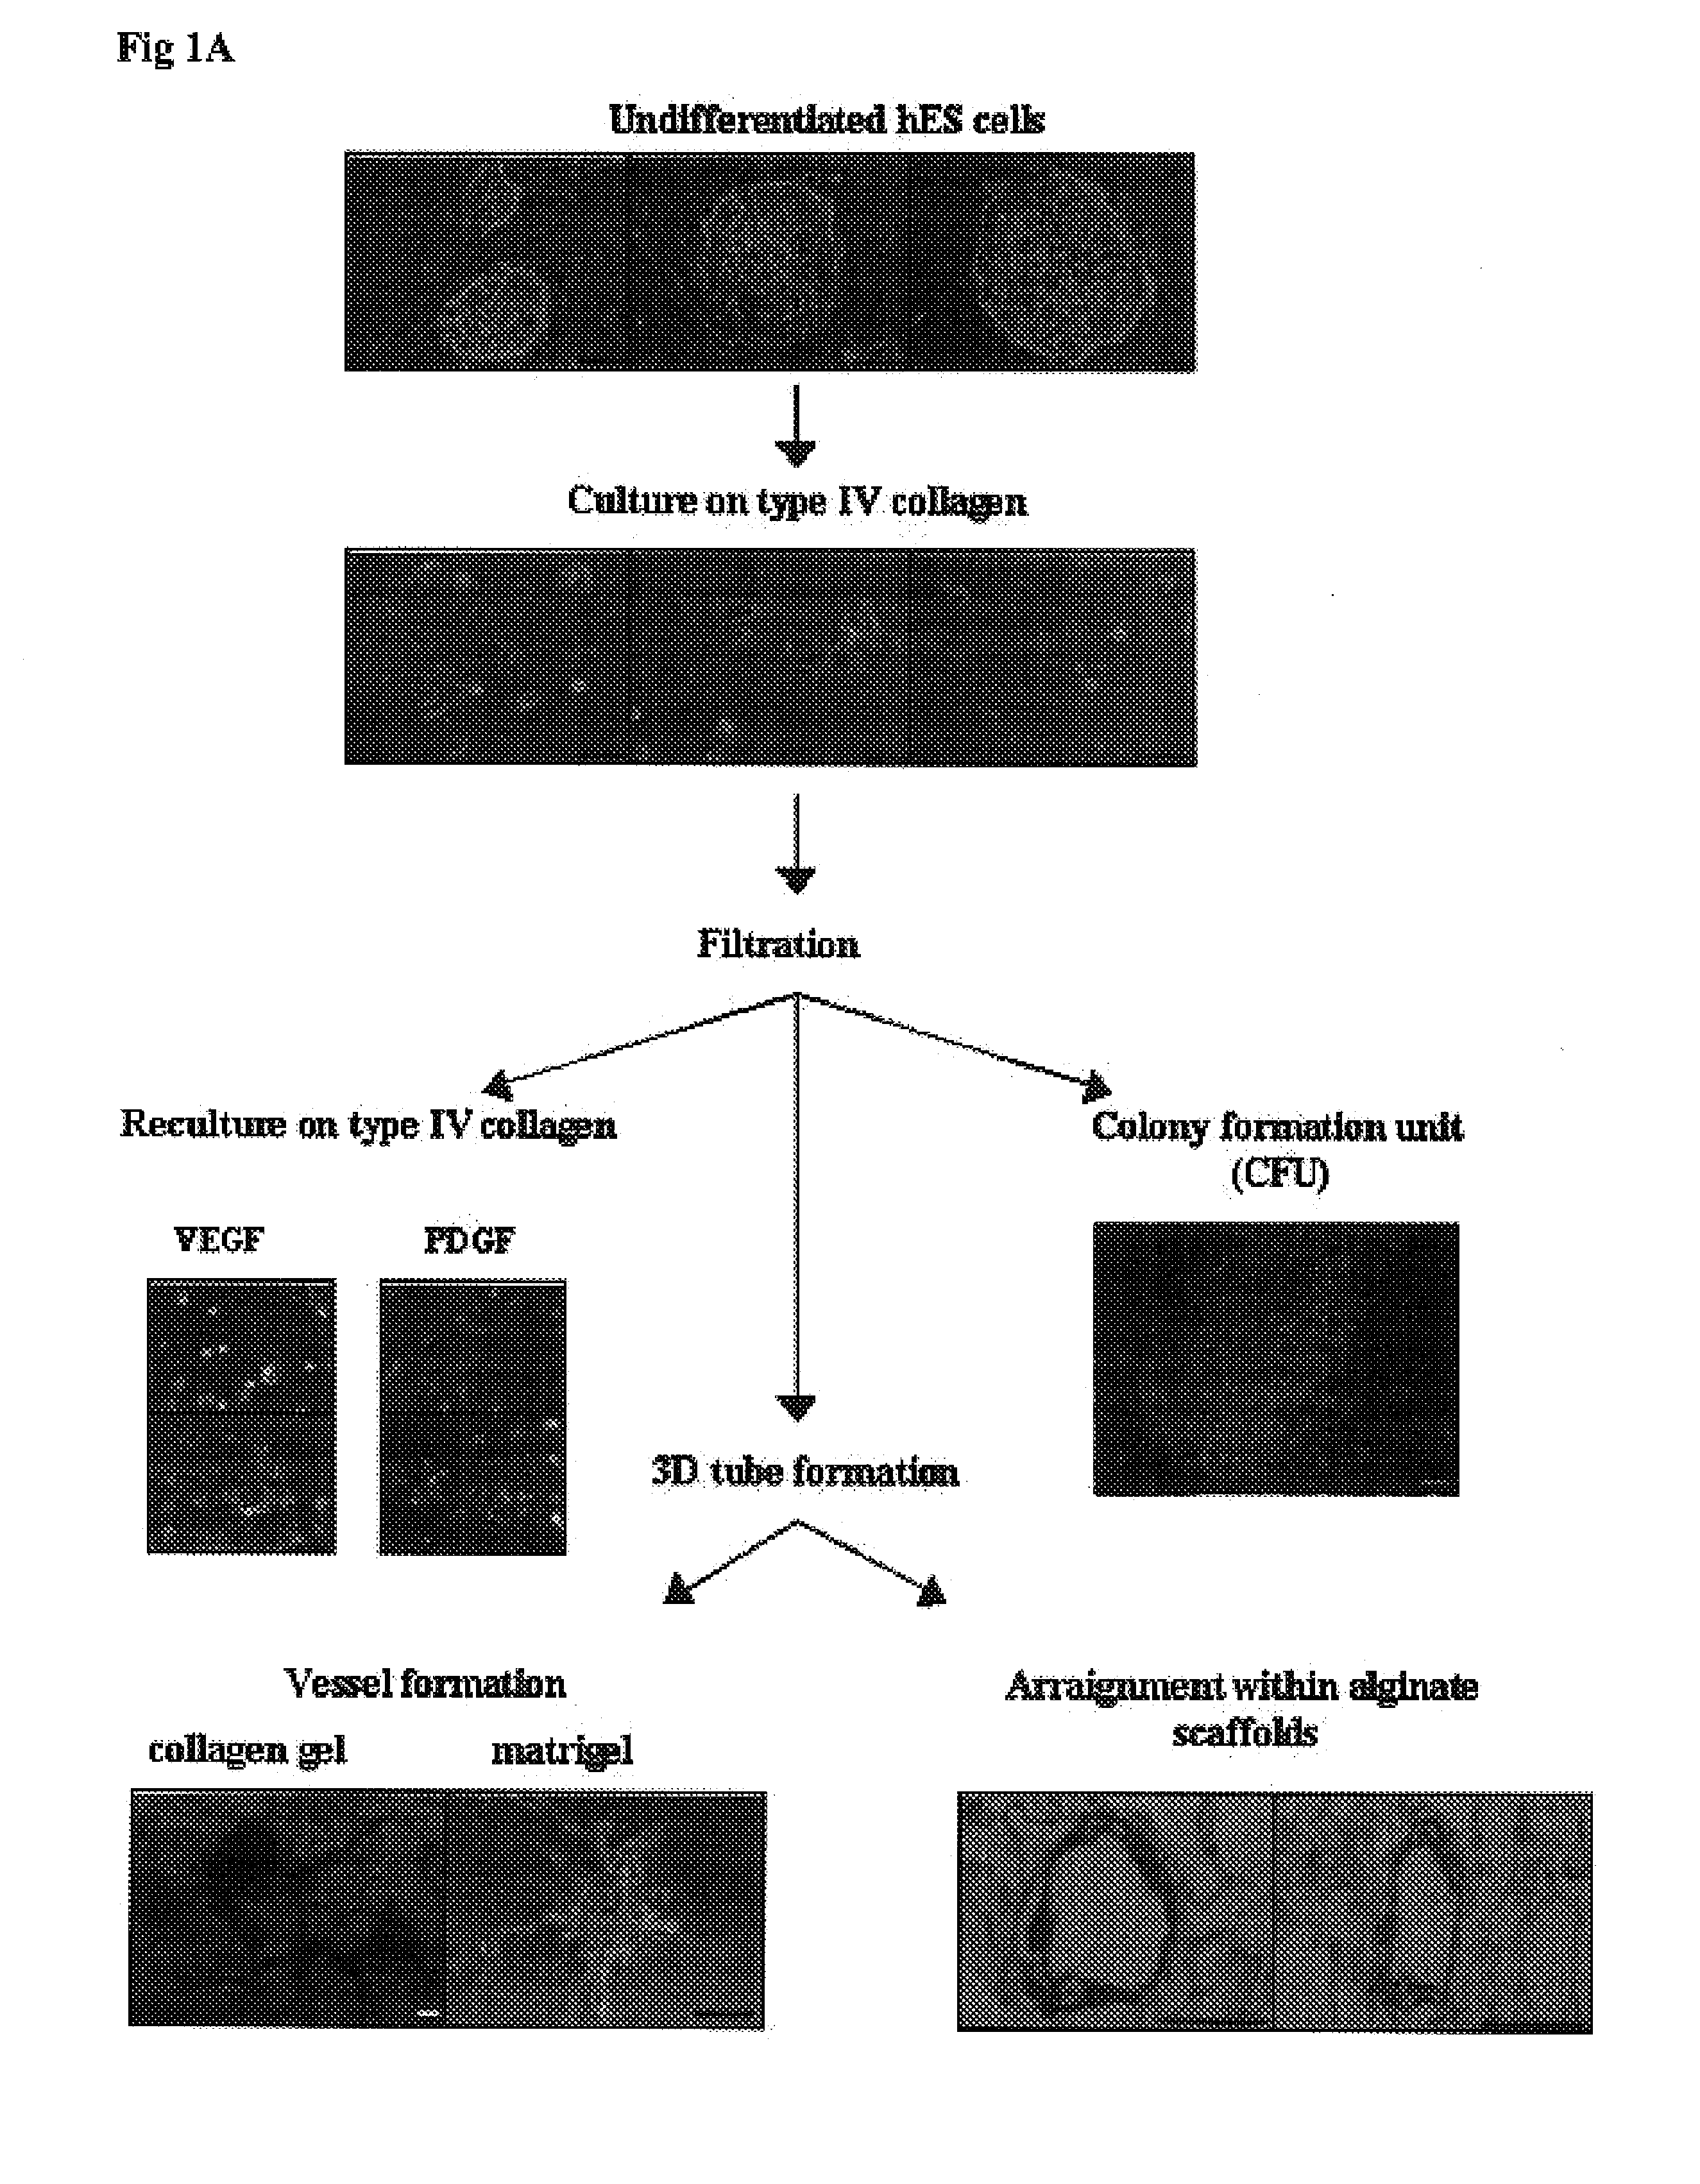 Methods for the in-vitro identification, isolation and differentiation of vasculogenic progenitor cells